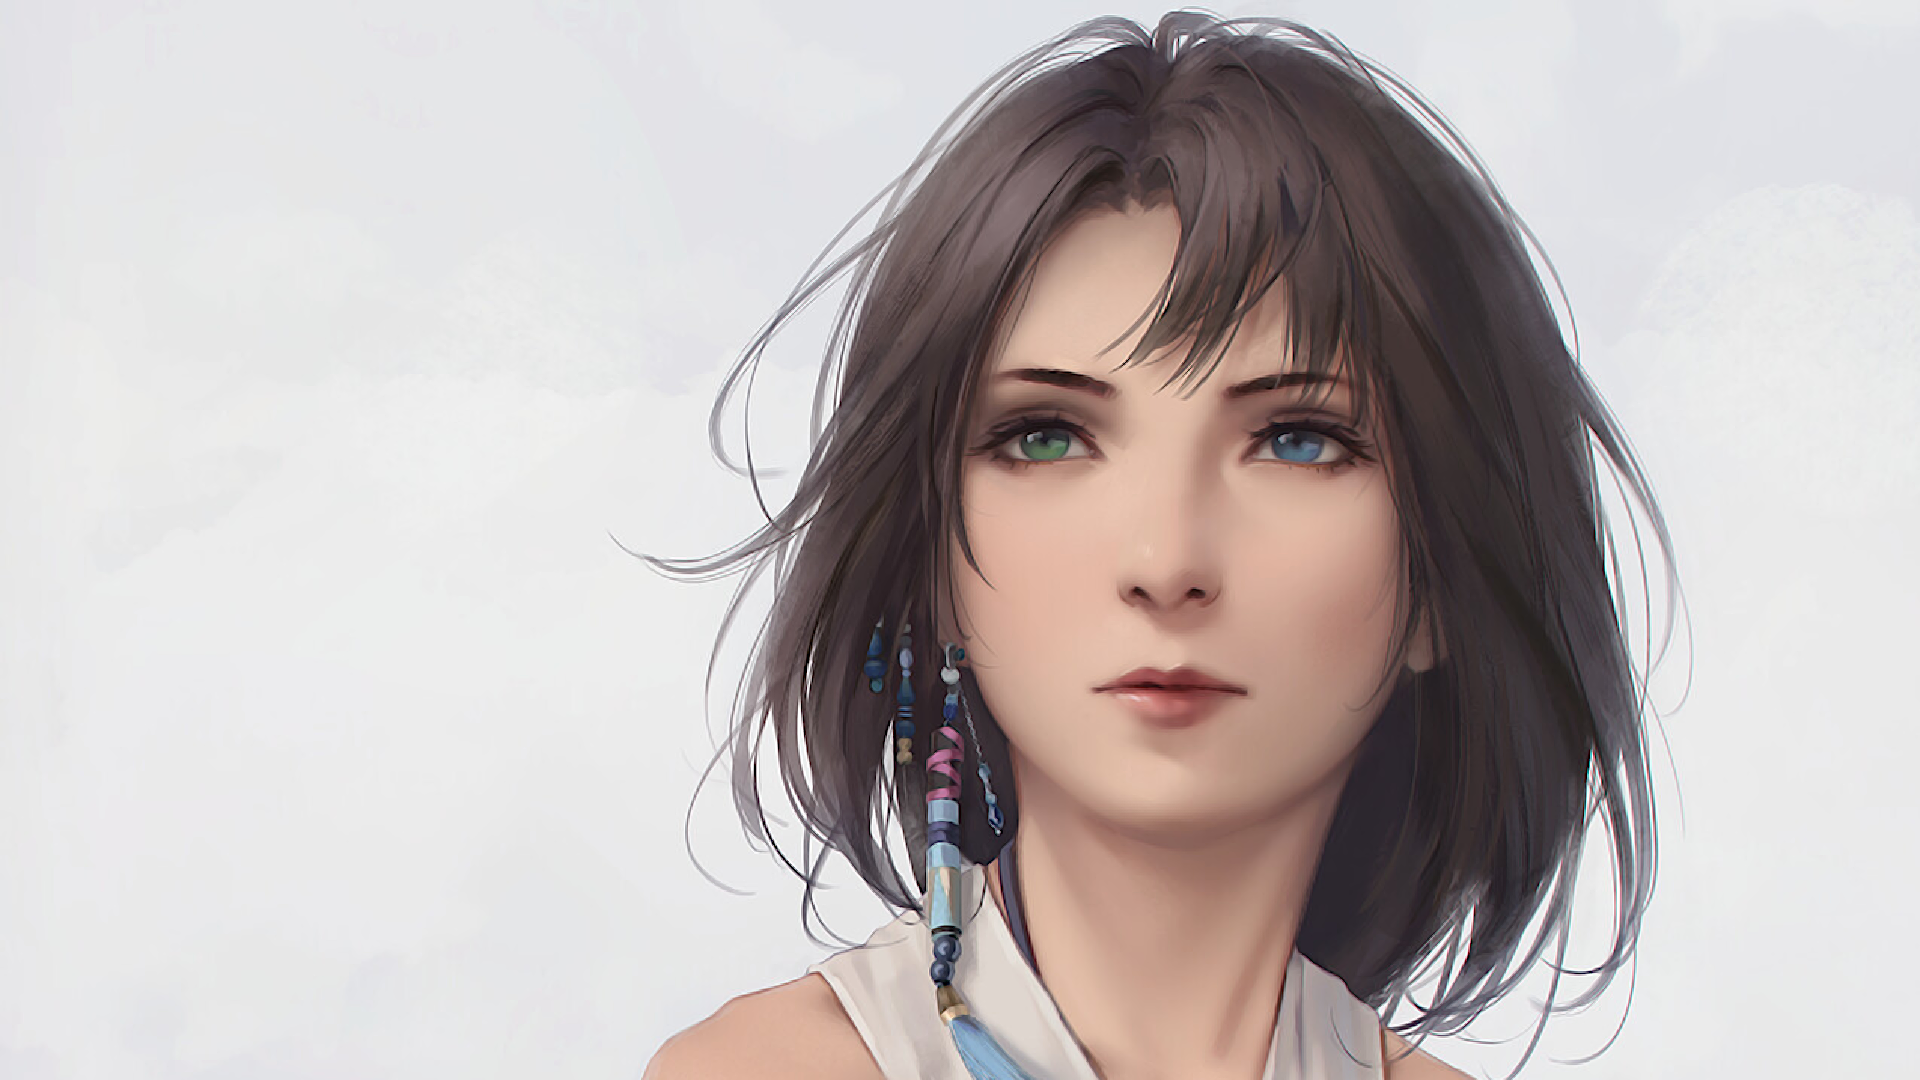 Final Fantasy X Picture by Miura Naoko